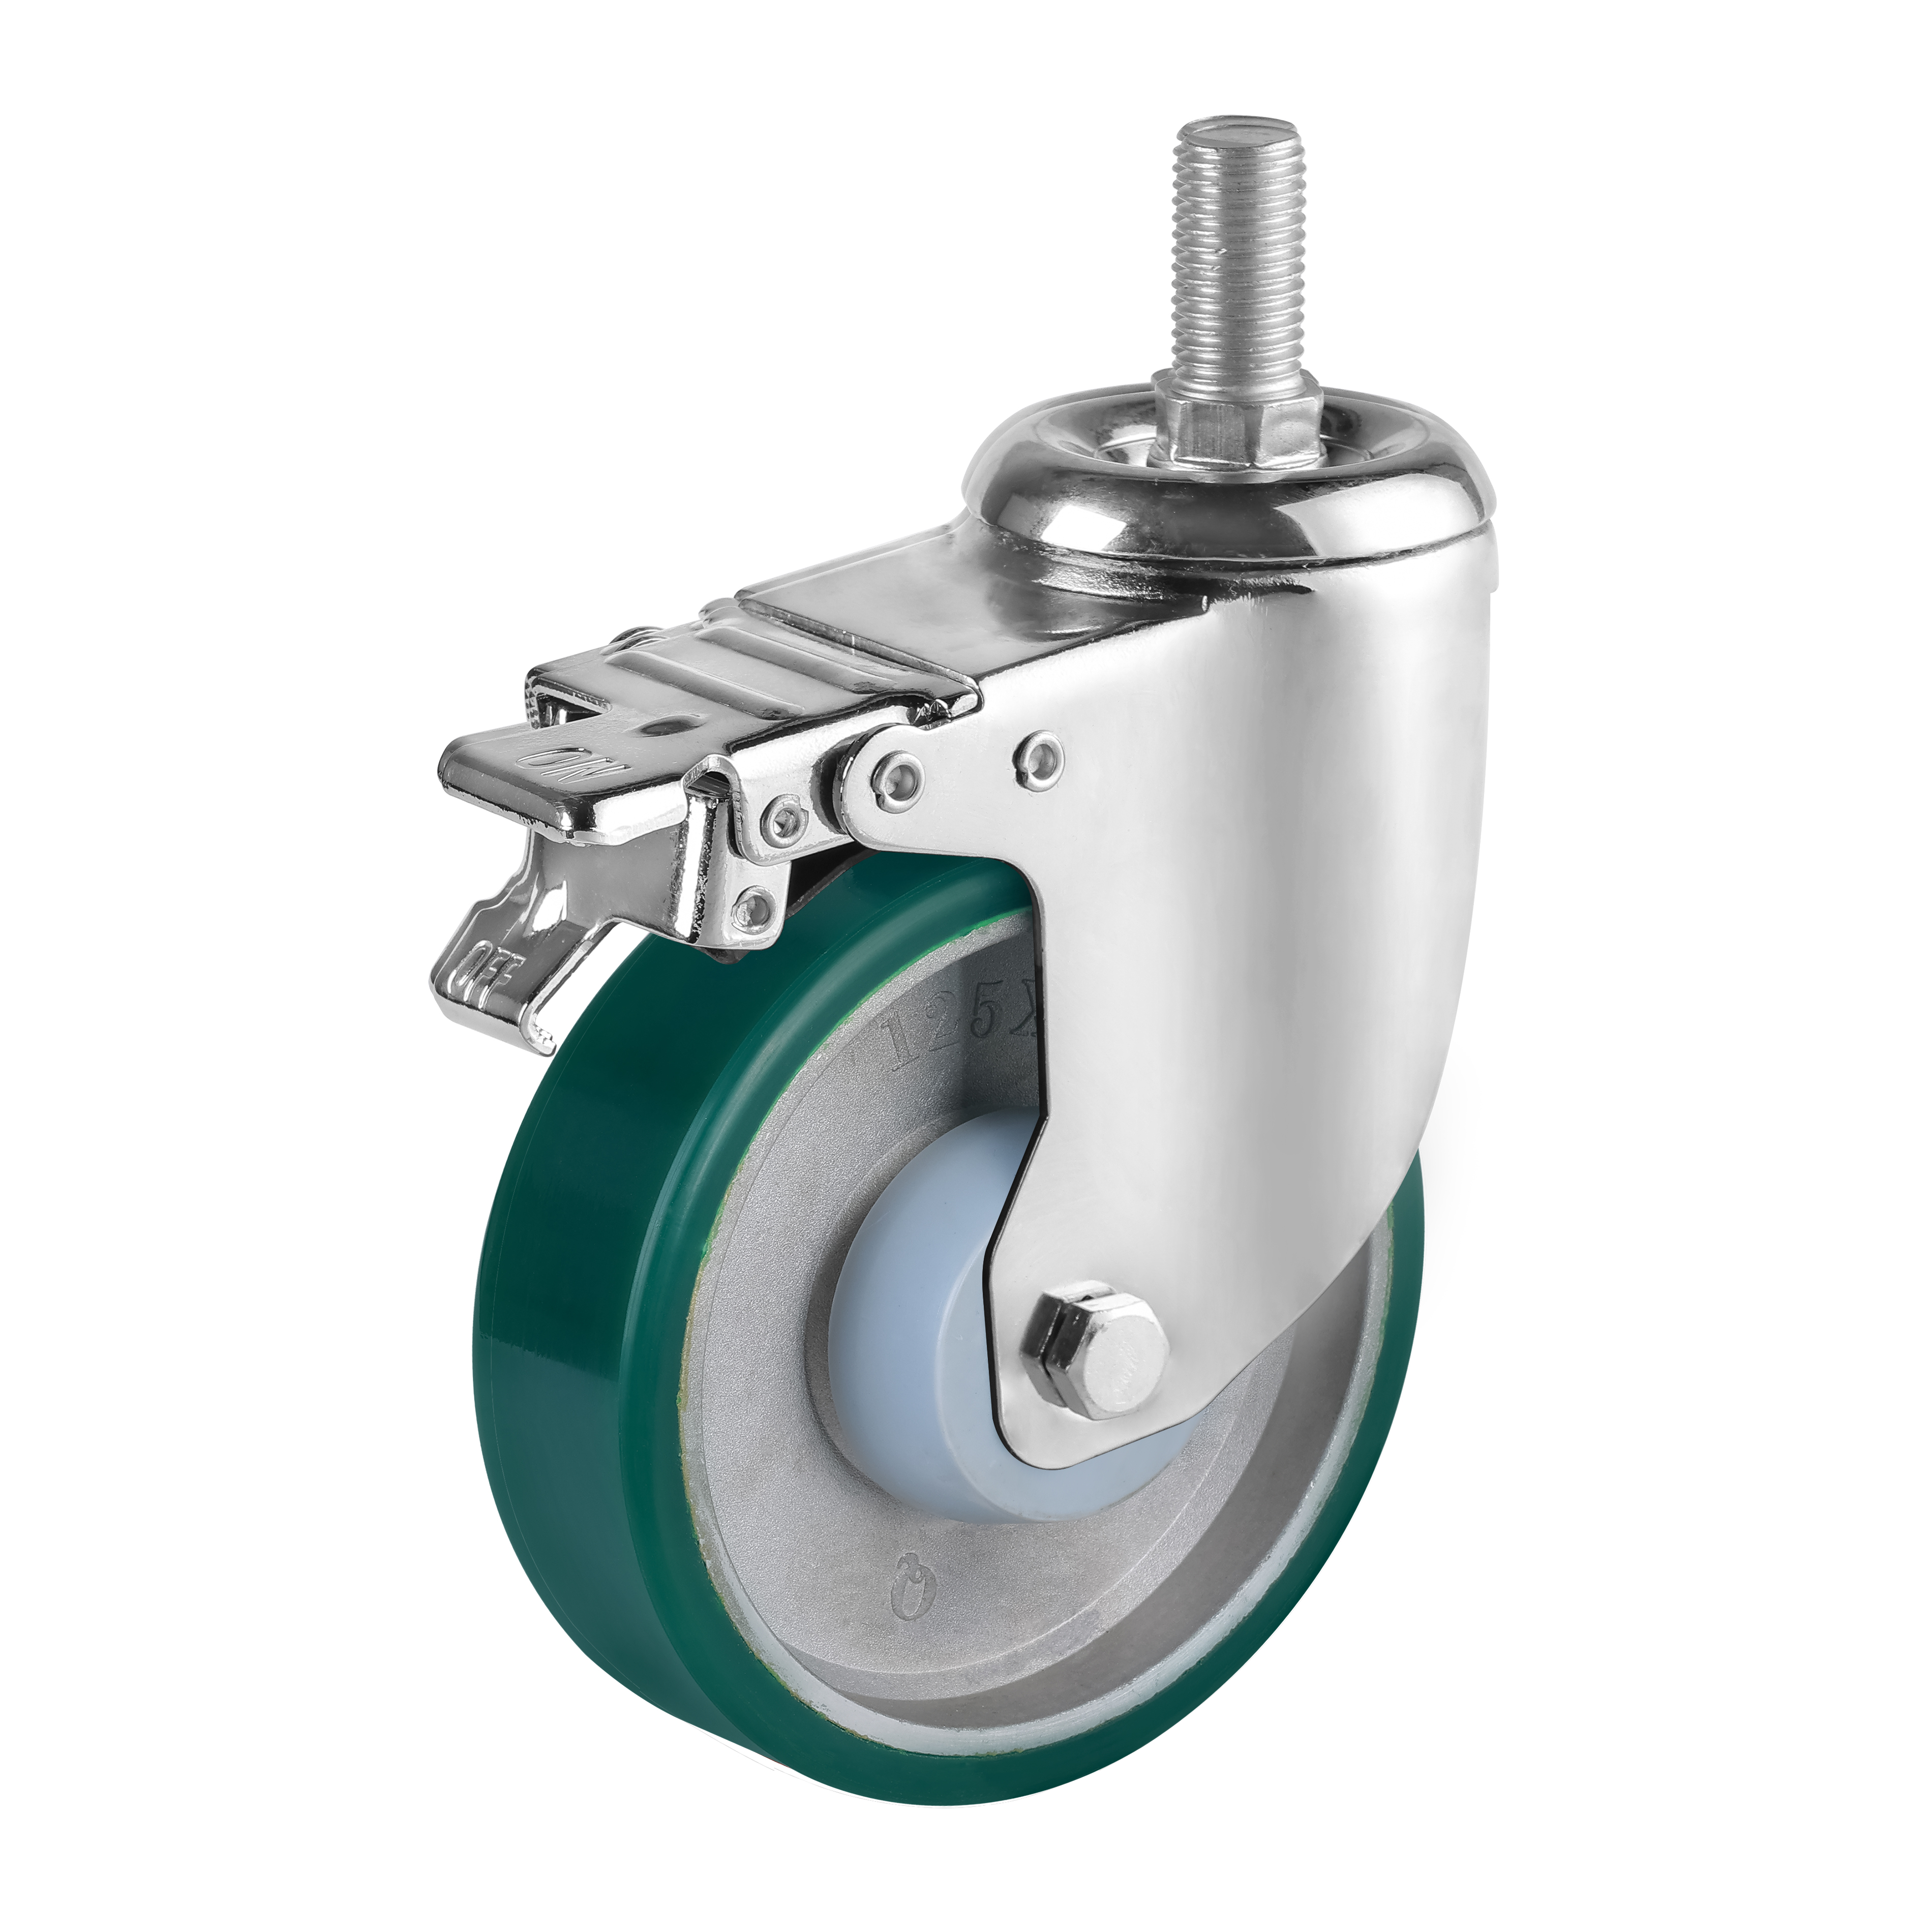 Why Choose Us for Your Caster Wheel Needs